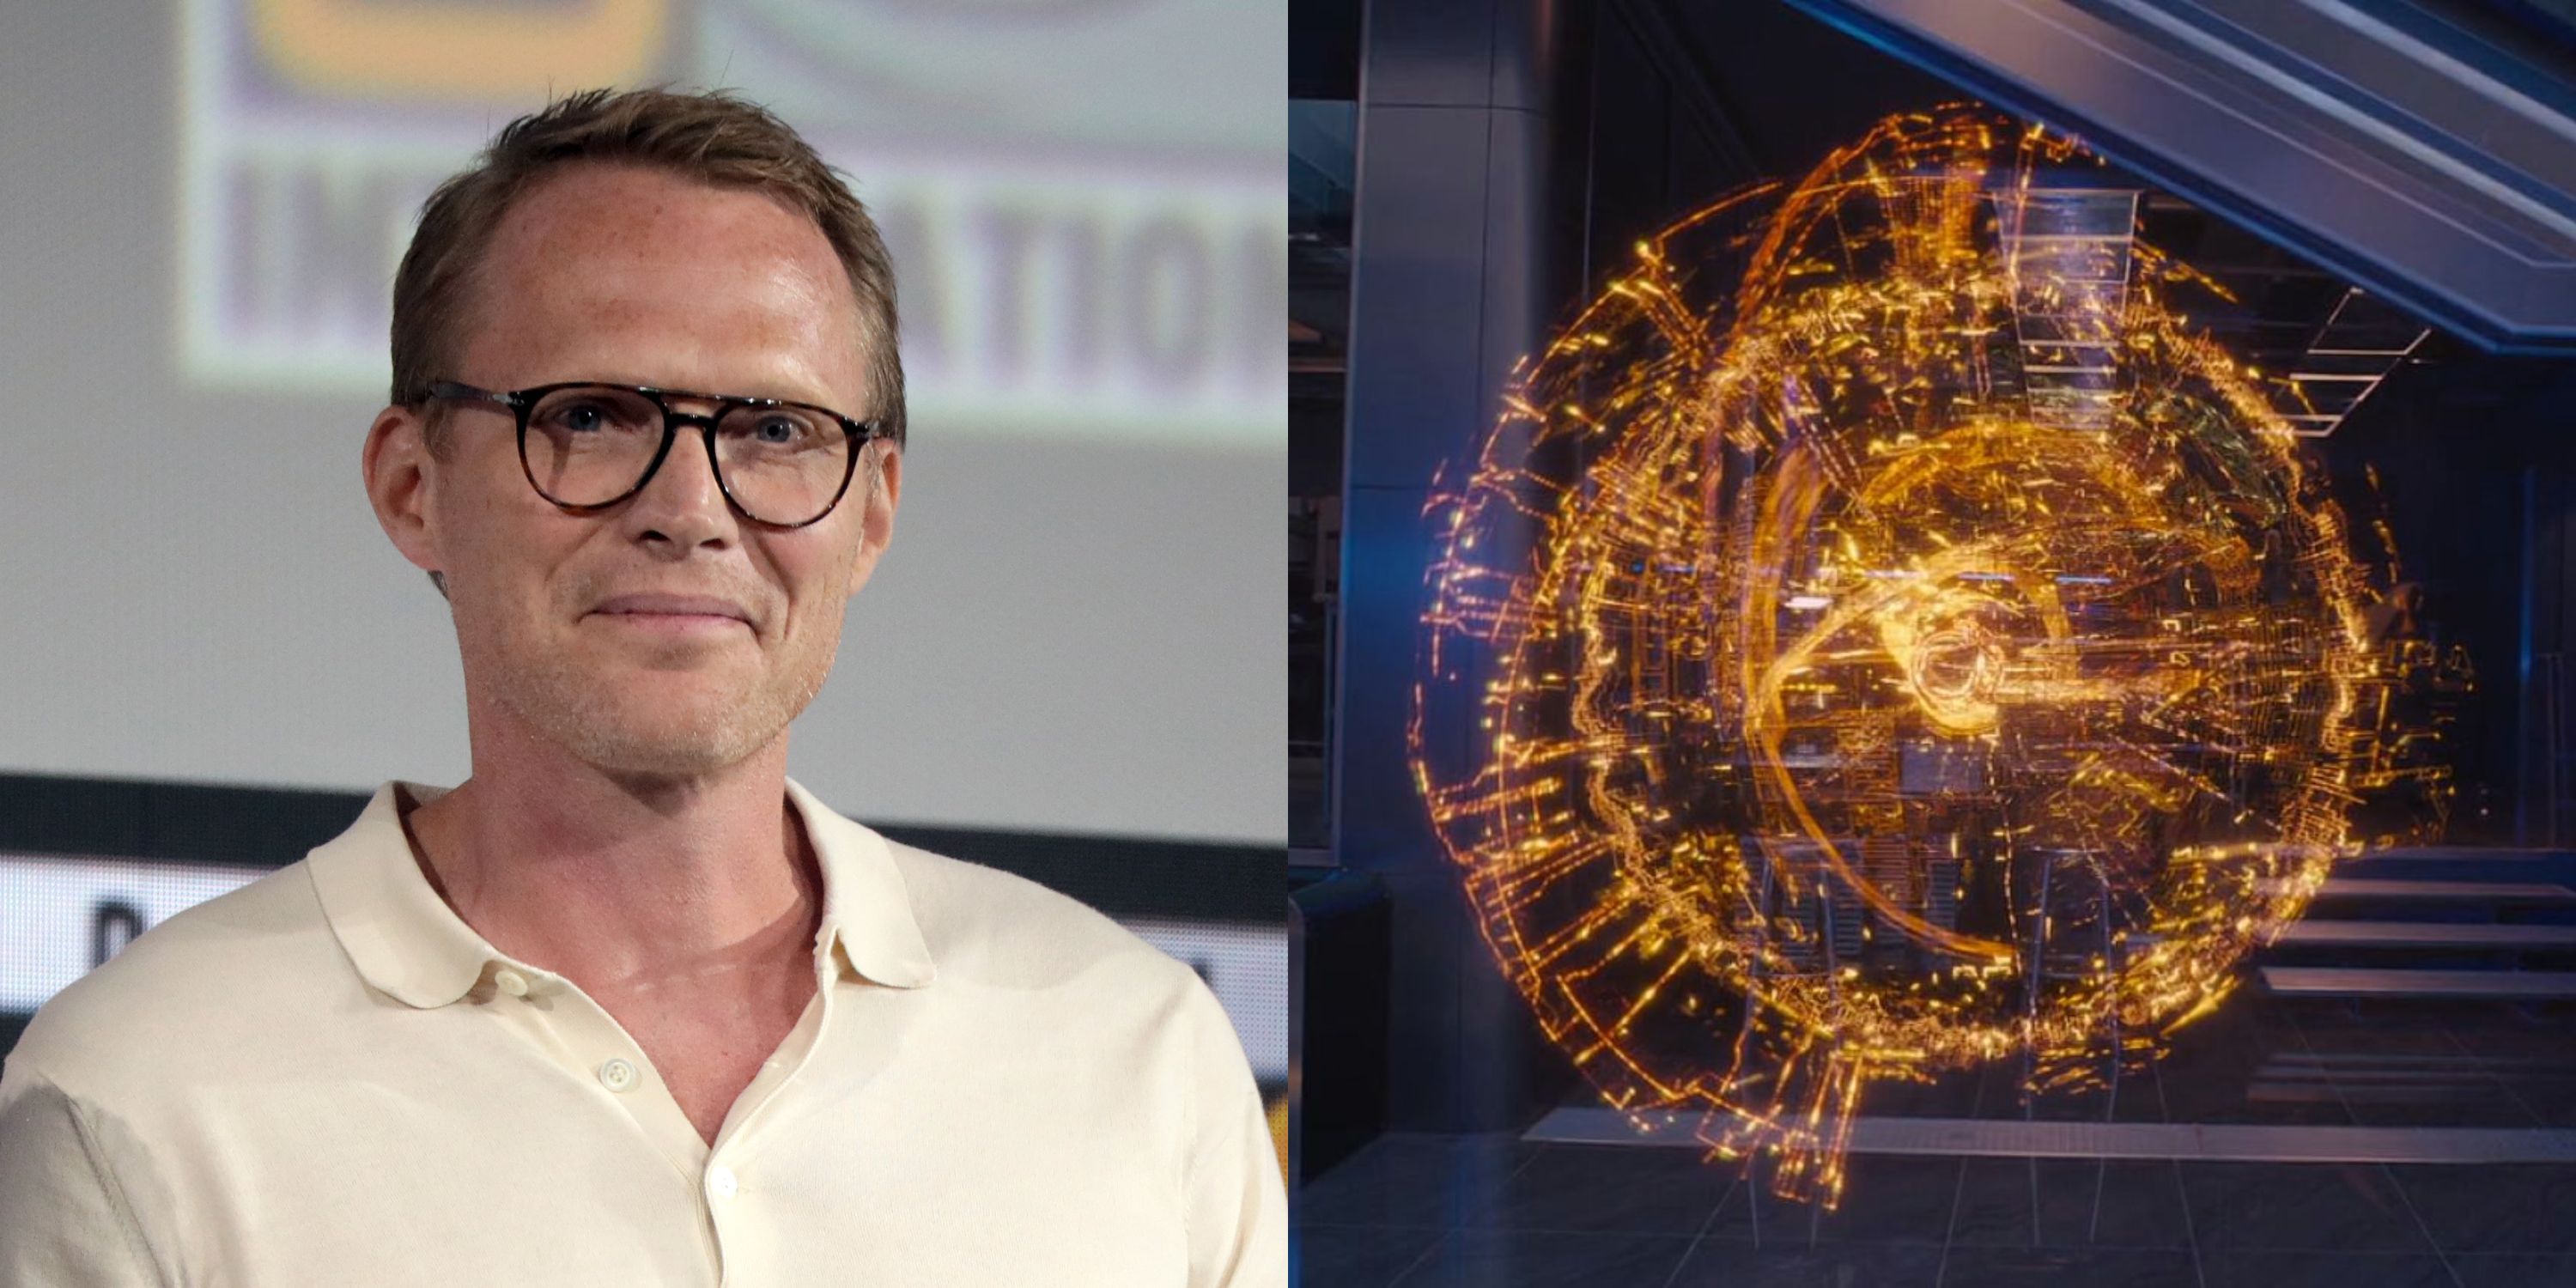 Paul Bettany as JARVIS